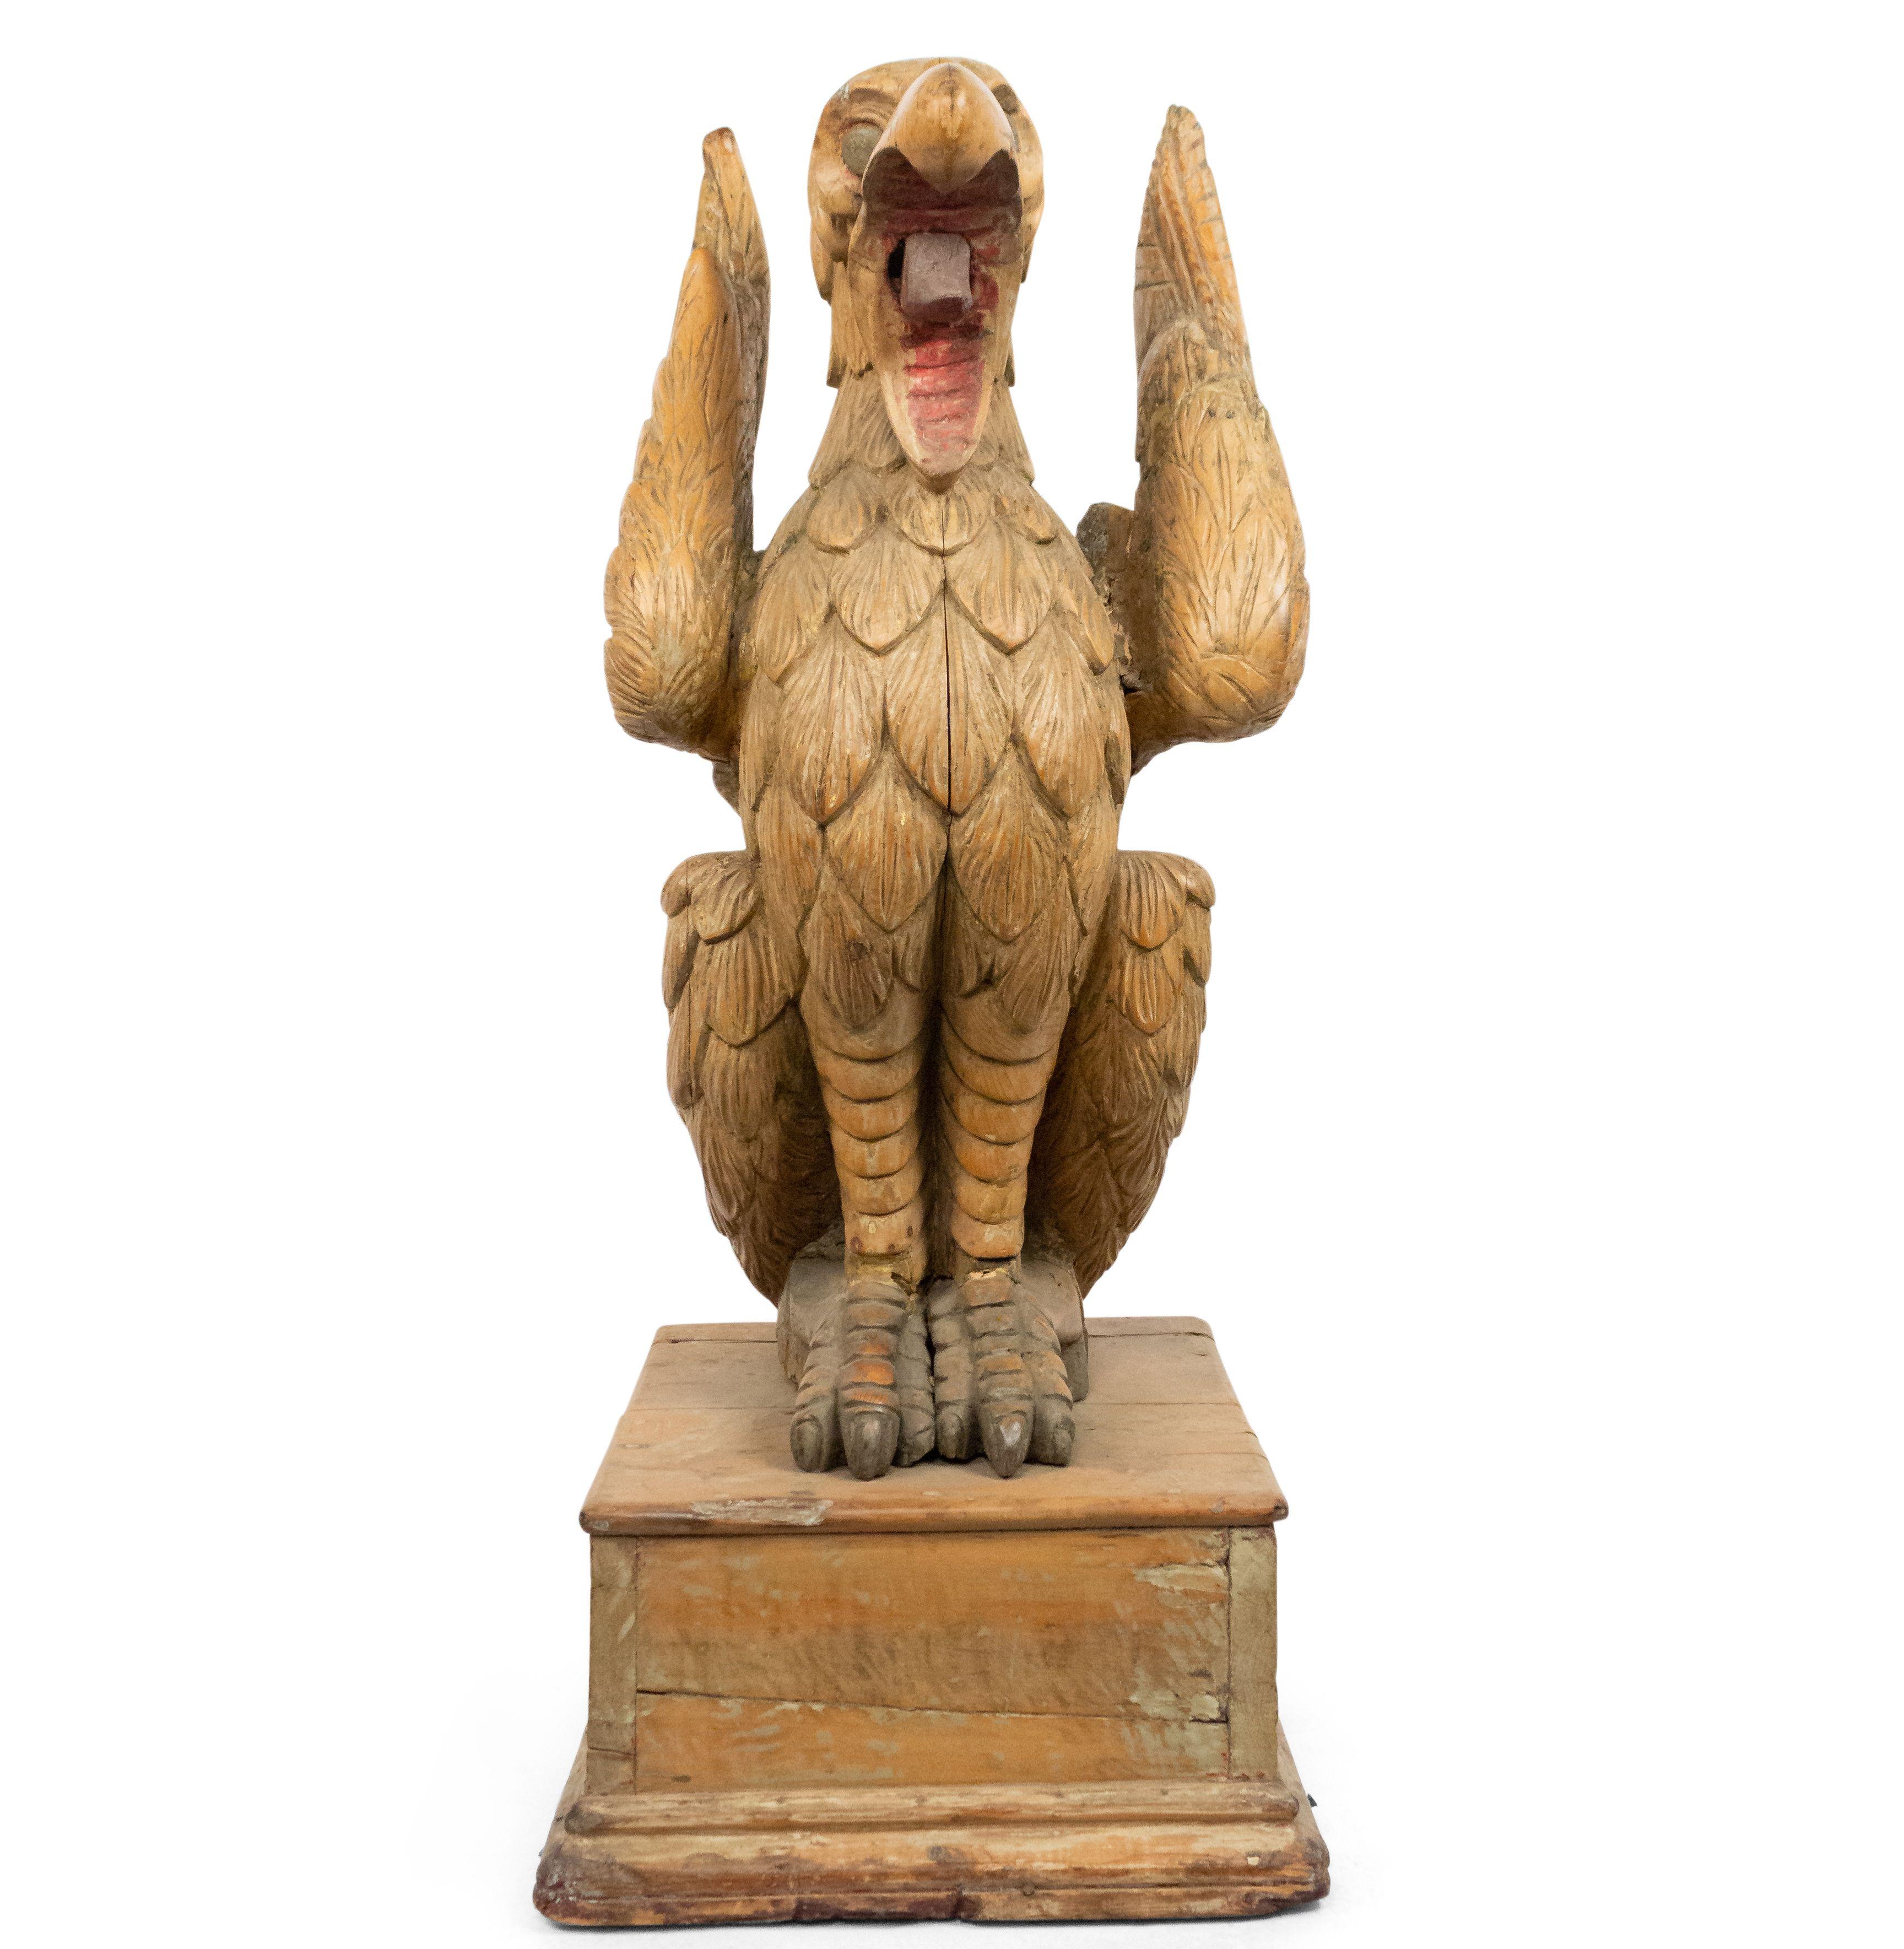 Continental 19th century Dutch life-sized carved wooden eagle figure with open mouth on square pedestal.